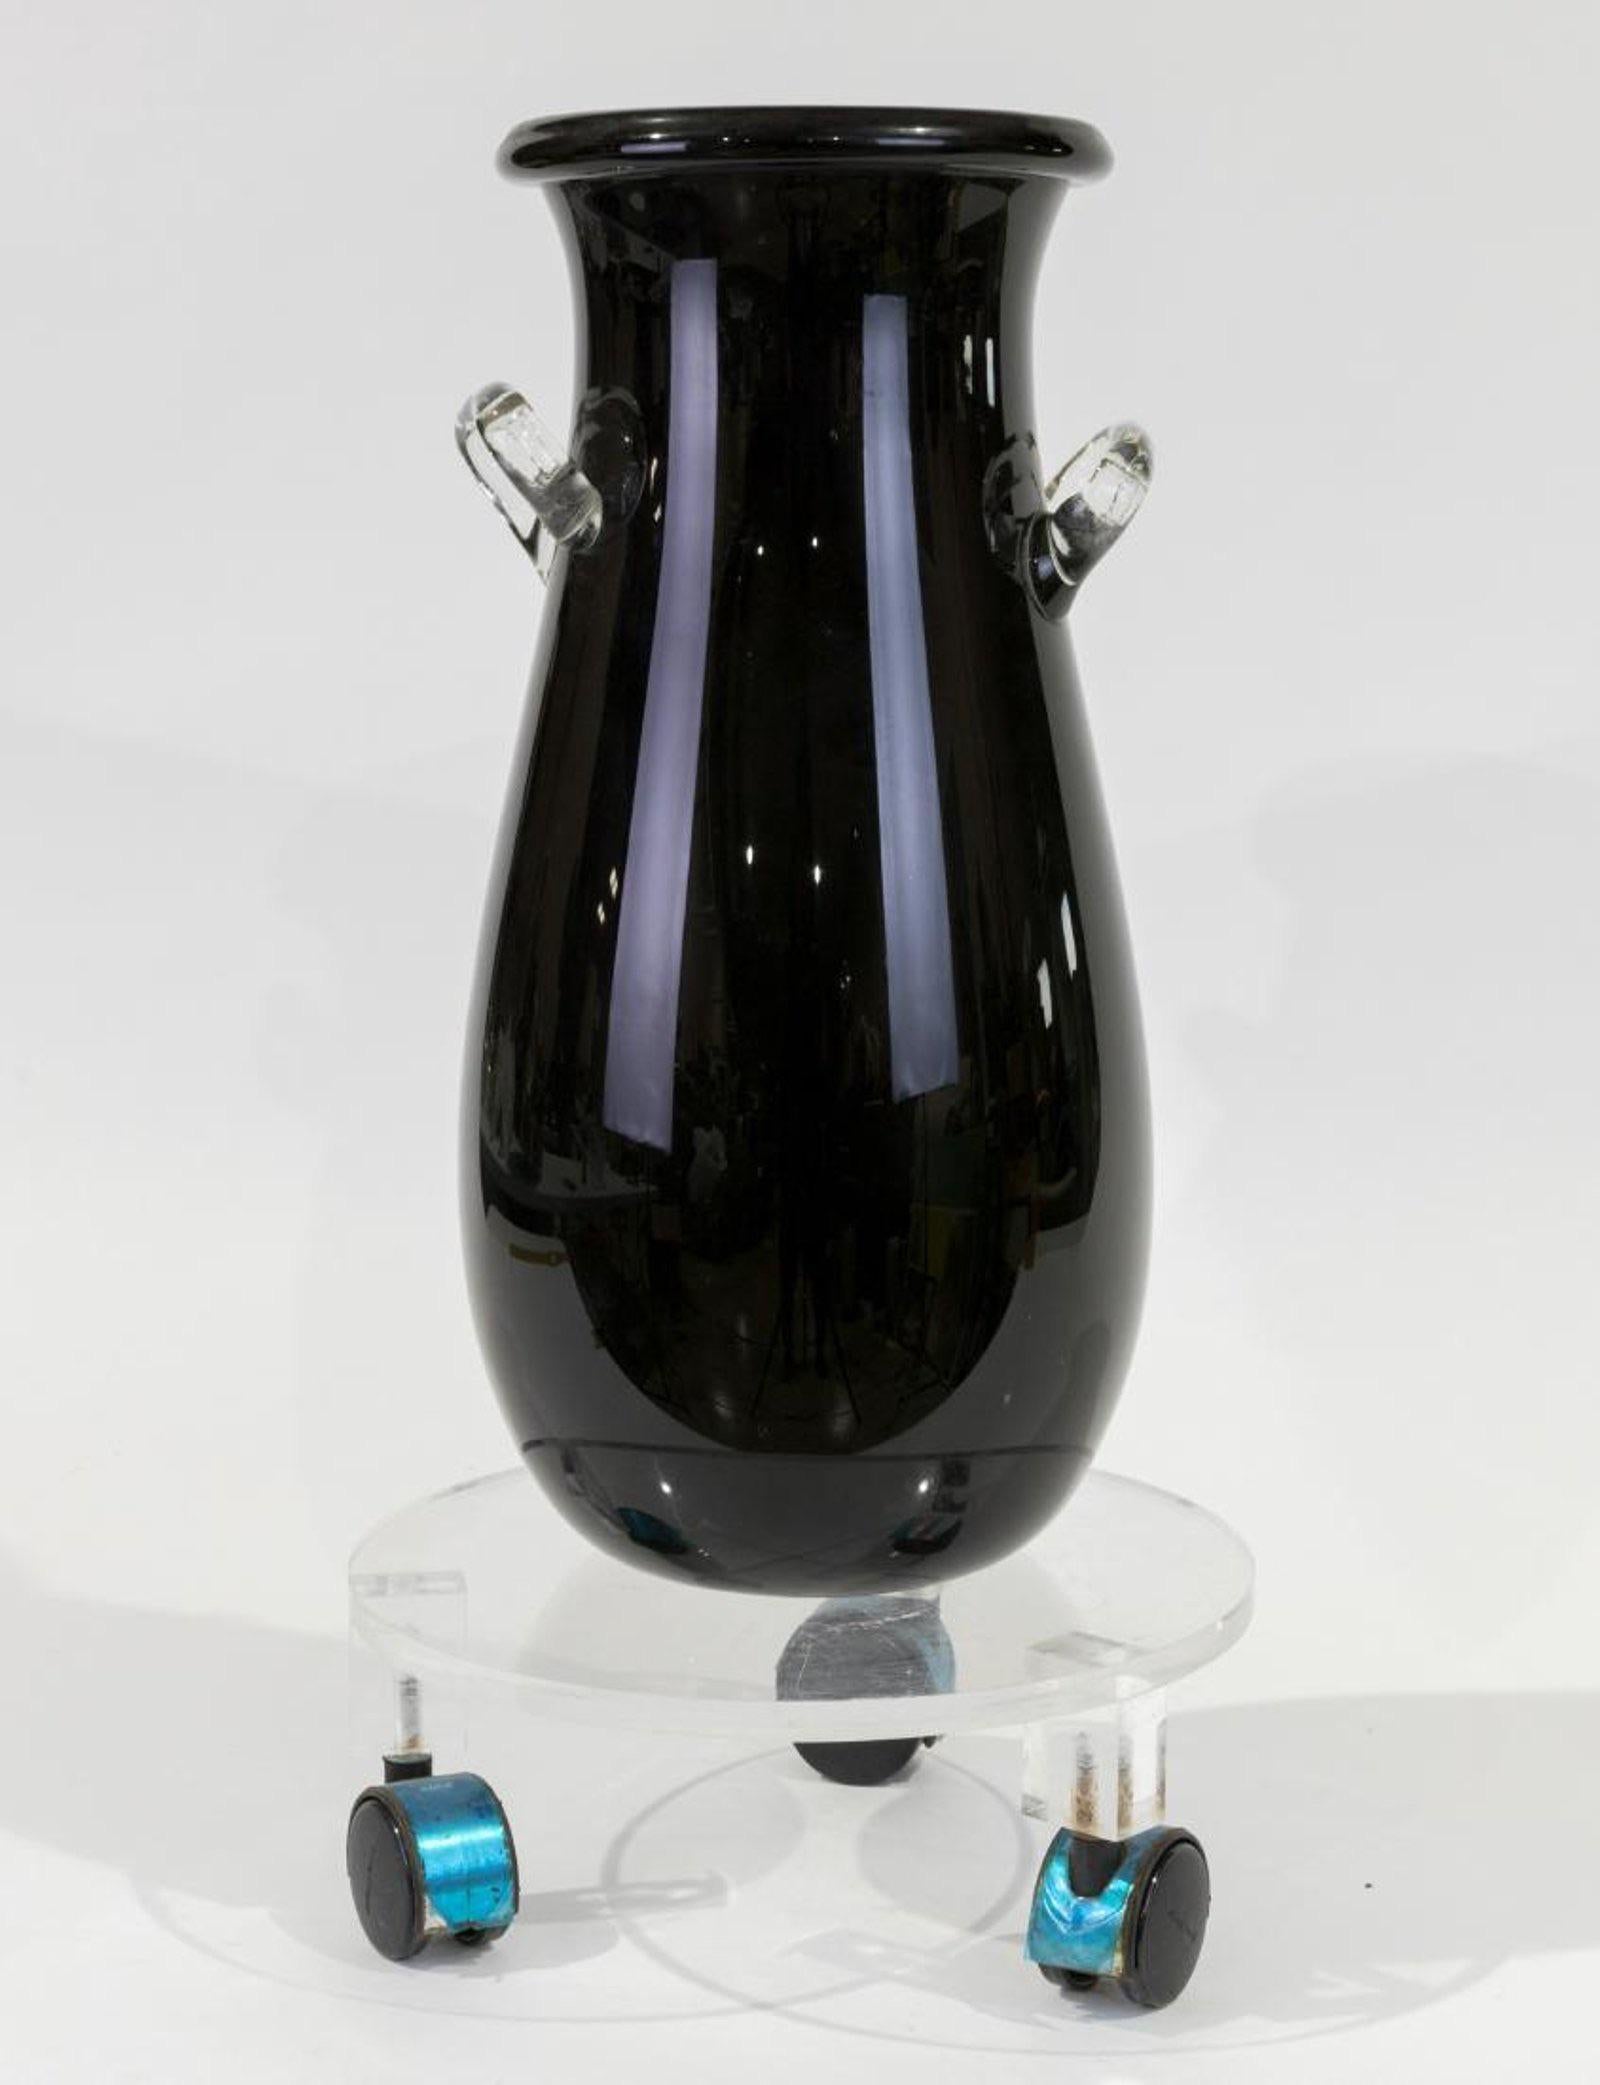 Mid-late 20th century Postmodern Murano art glass floor vase amphora, blue-black, handled, round lip.
Gorgeous Postmodern take on the classical tradition: A large Murano glass krater in deep blue / black on a luminous Lucite base with casters.